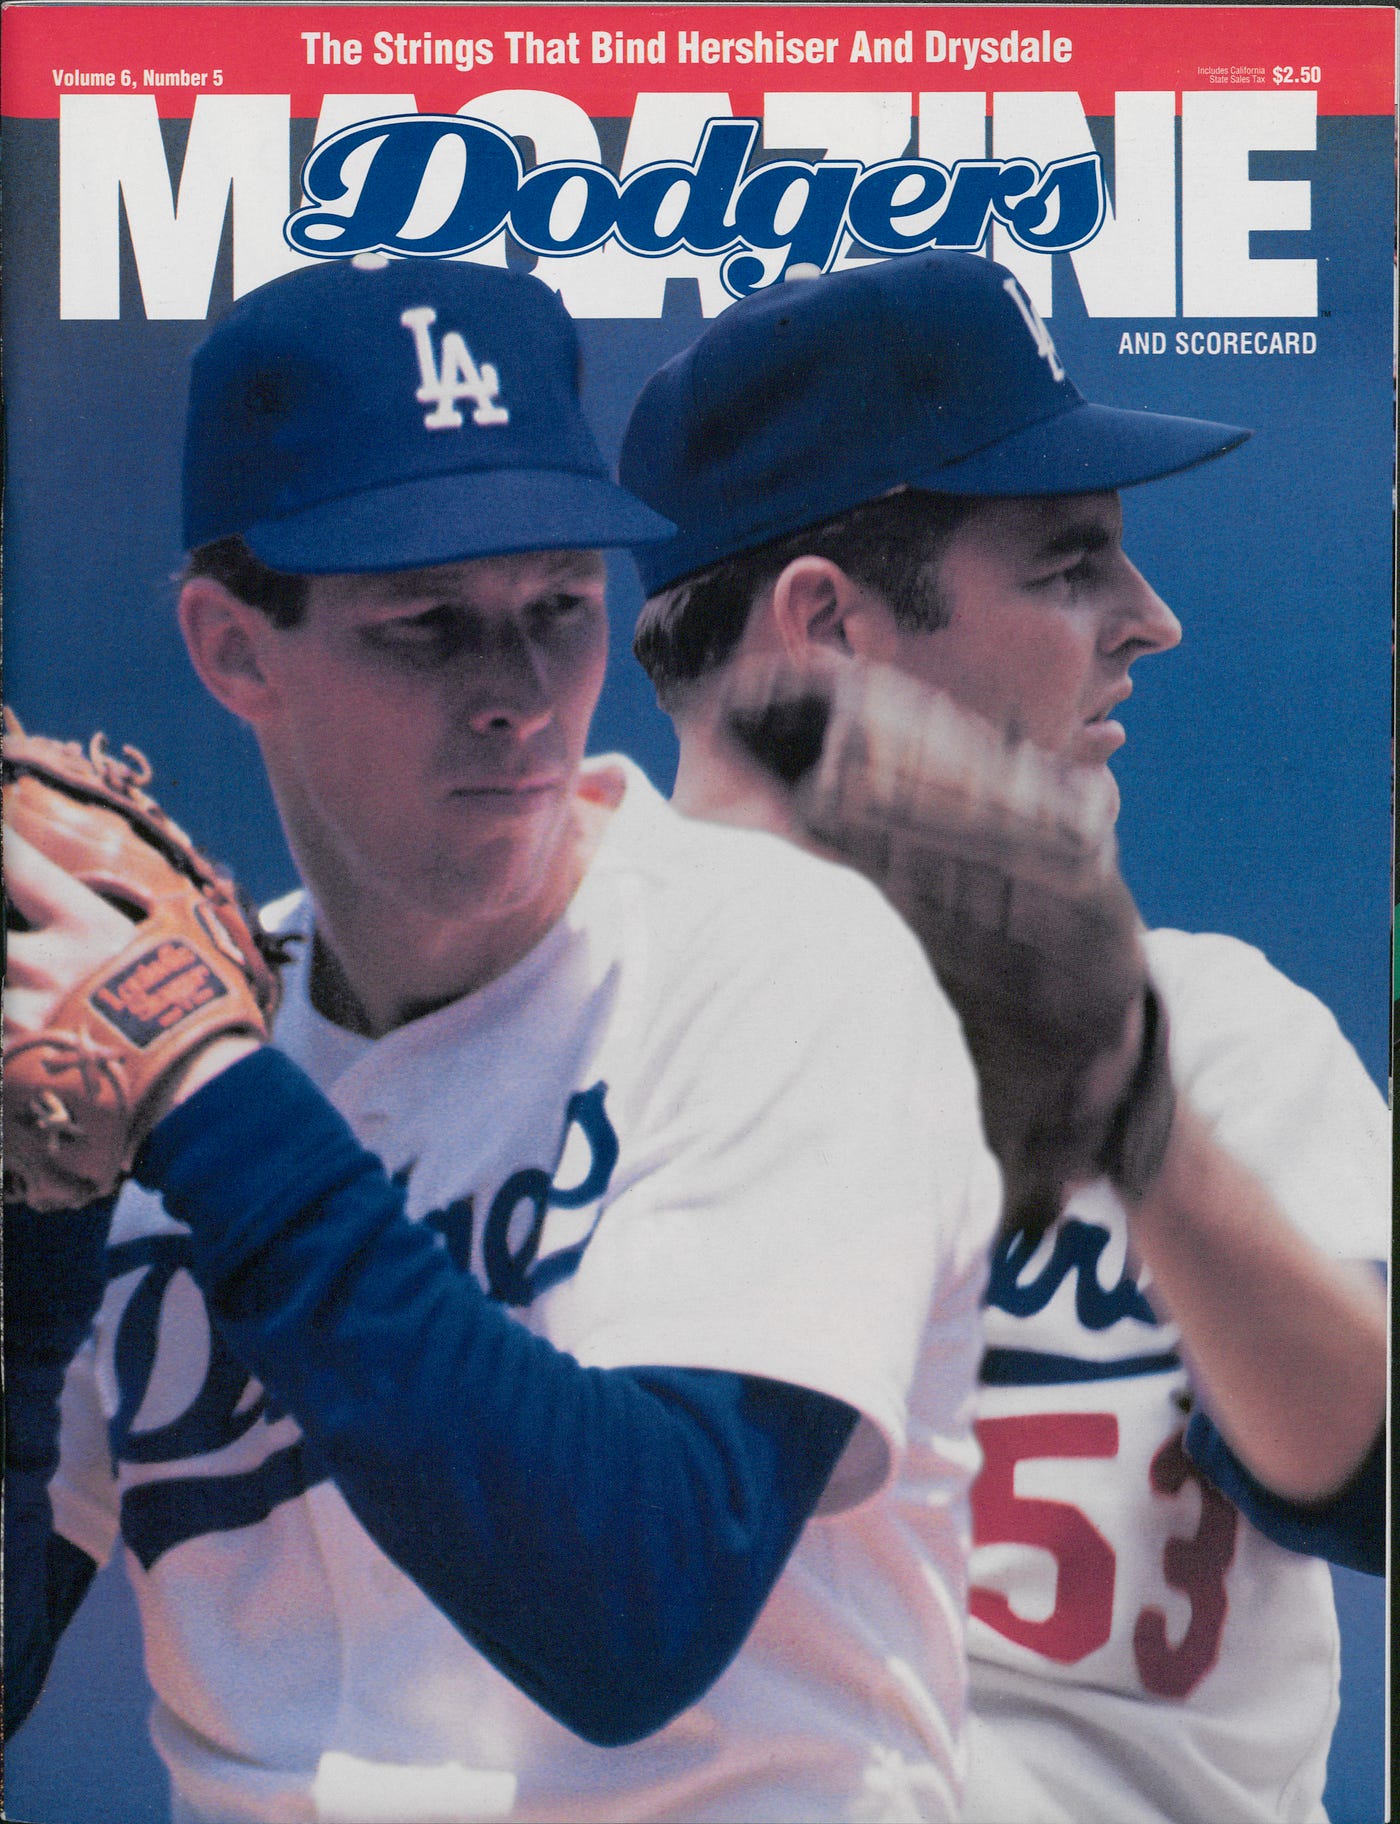 Why Isn't Orel Hershiser in the MLB Hall of Fame?